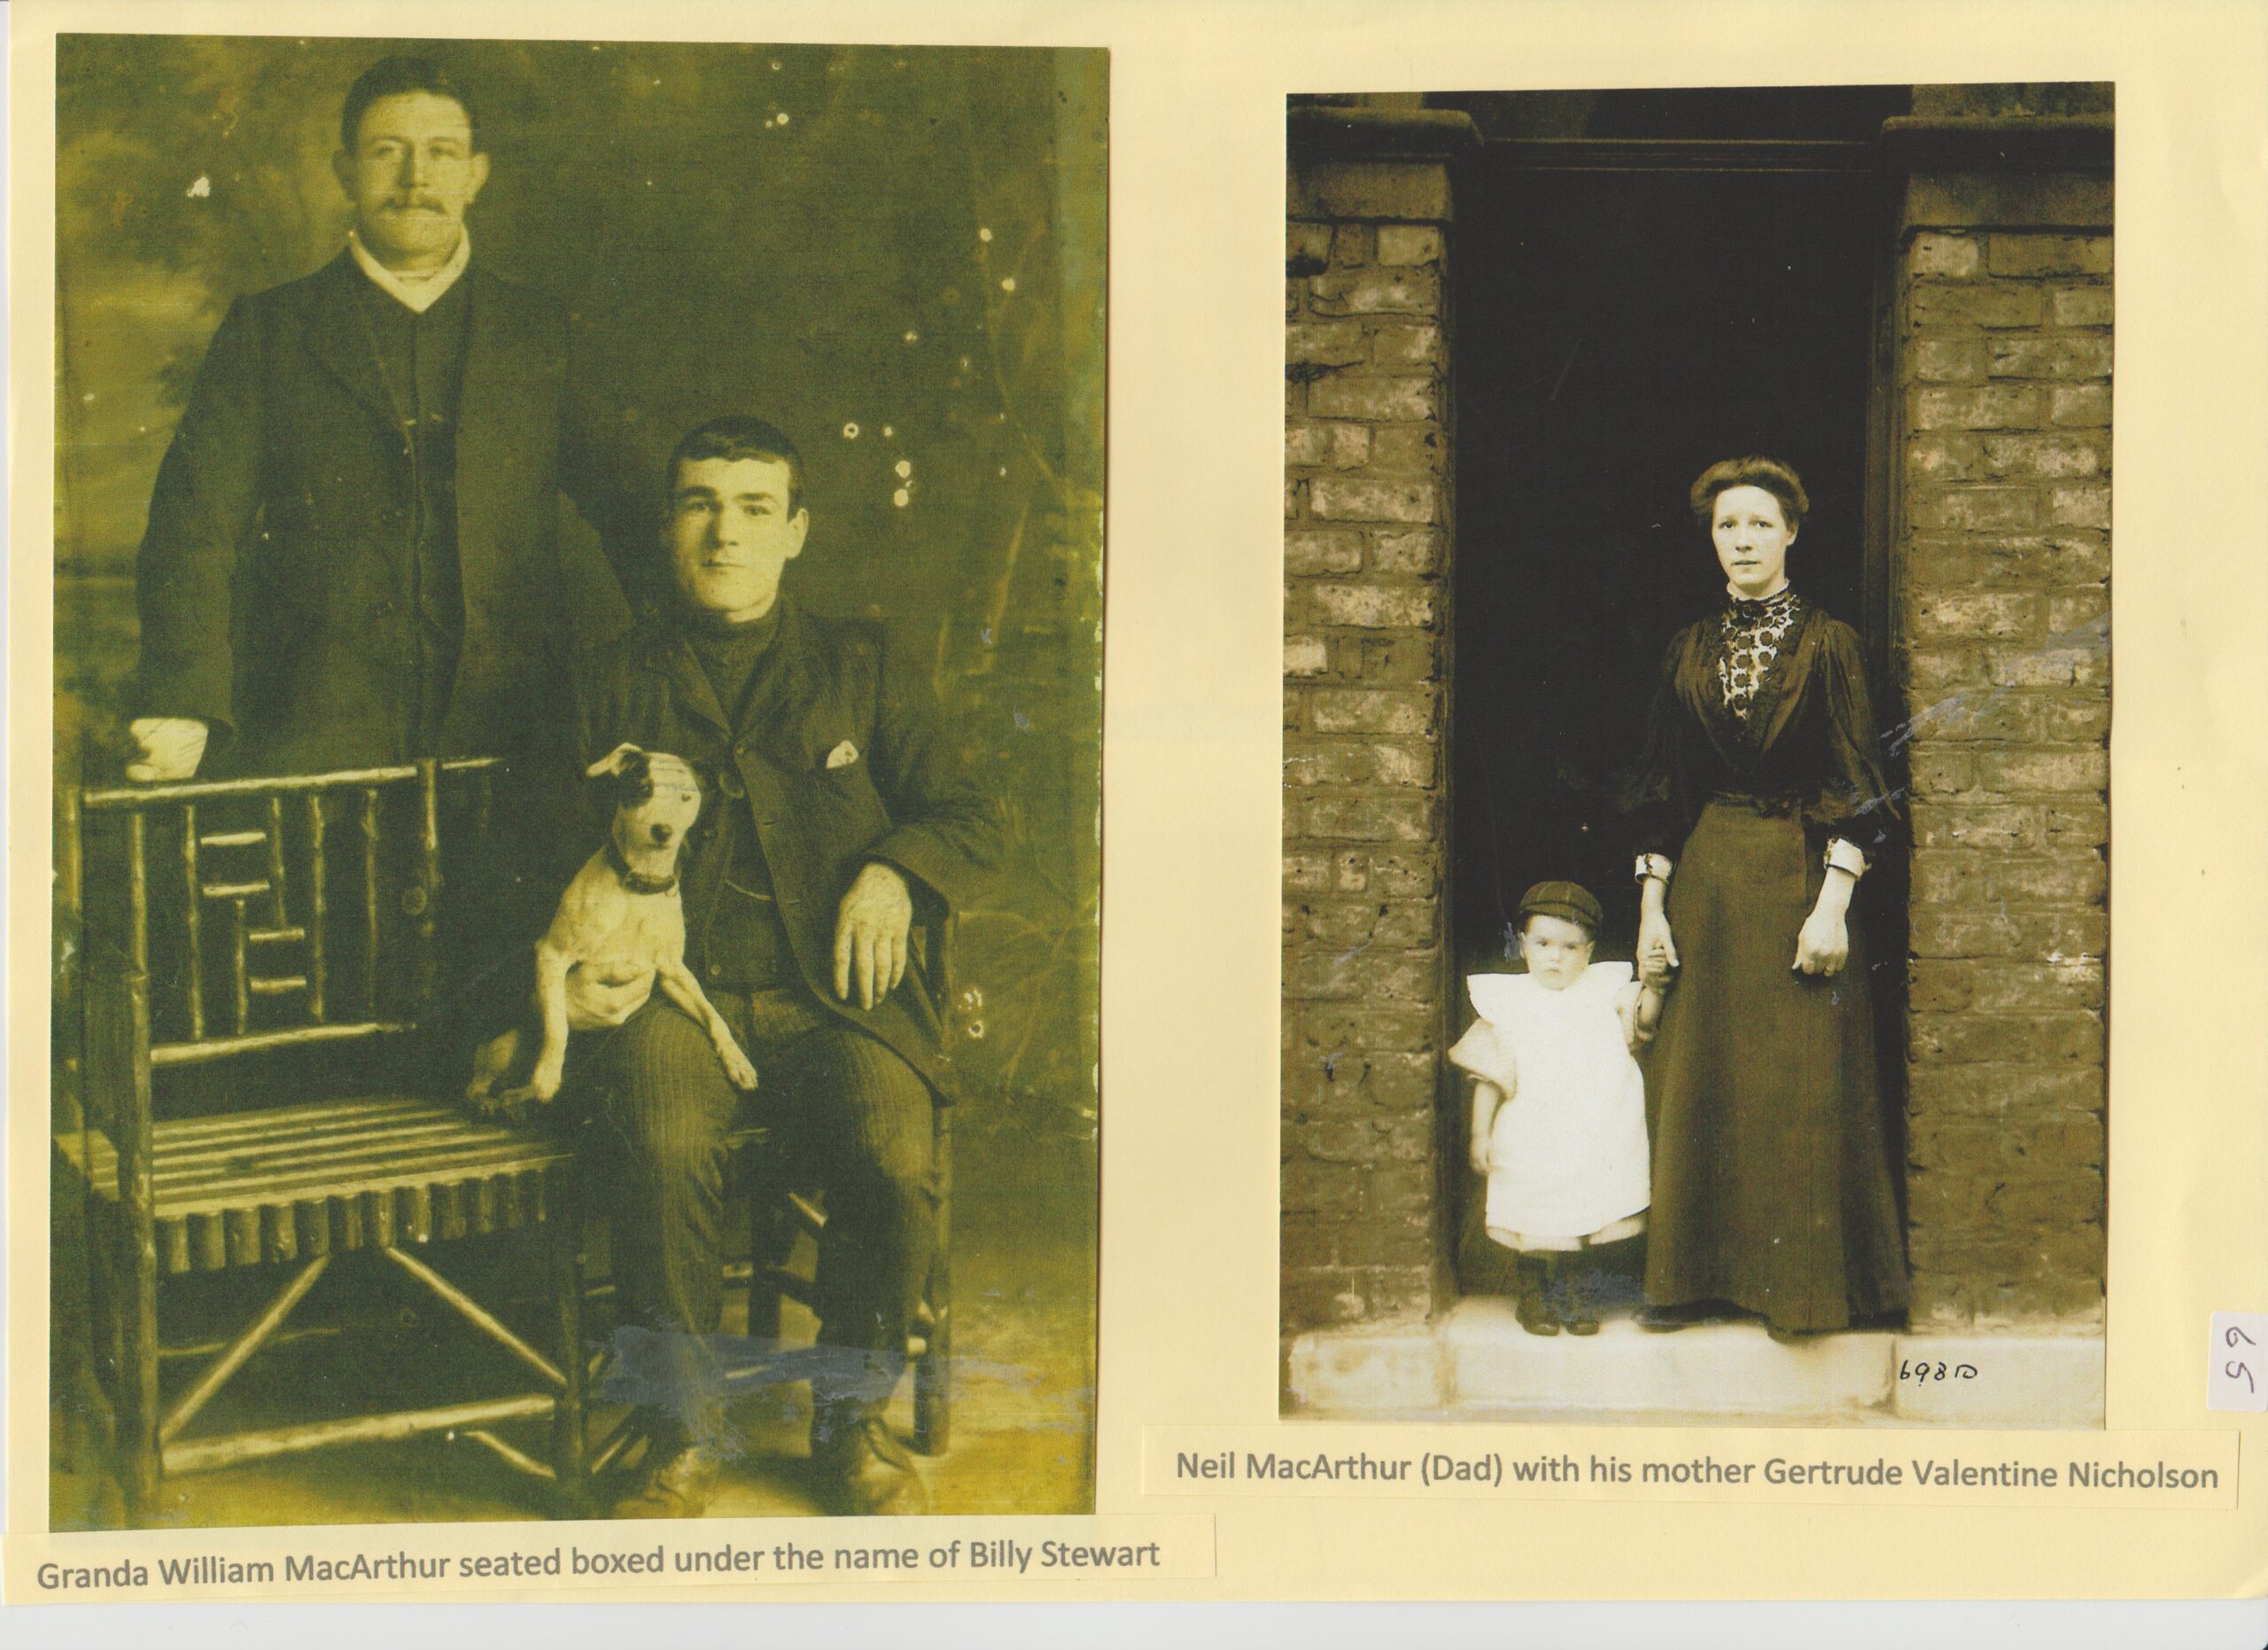 William MacArthur (boxed under name of Billy Stewart) Neil MacArthur and his mother Gertrude Valintine Nicholson